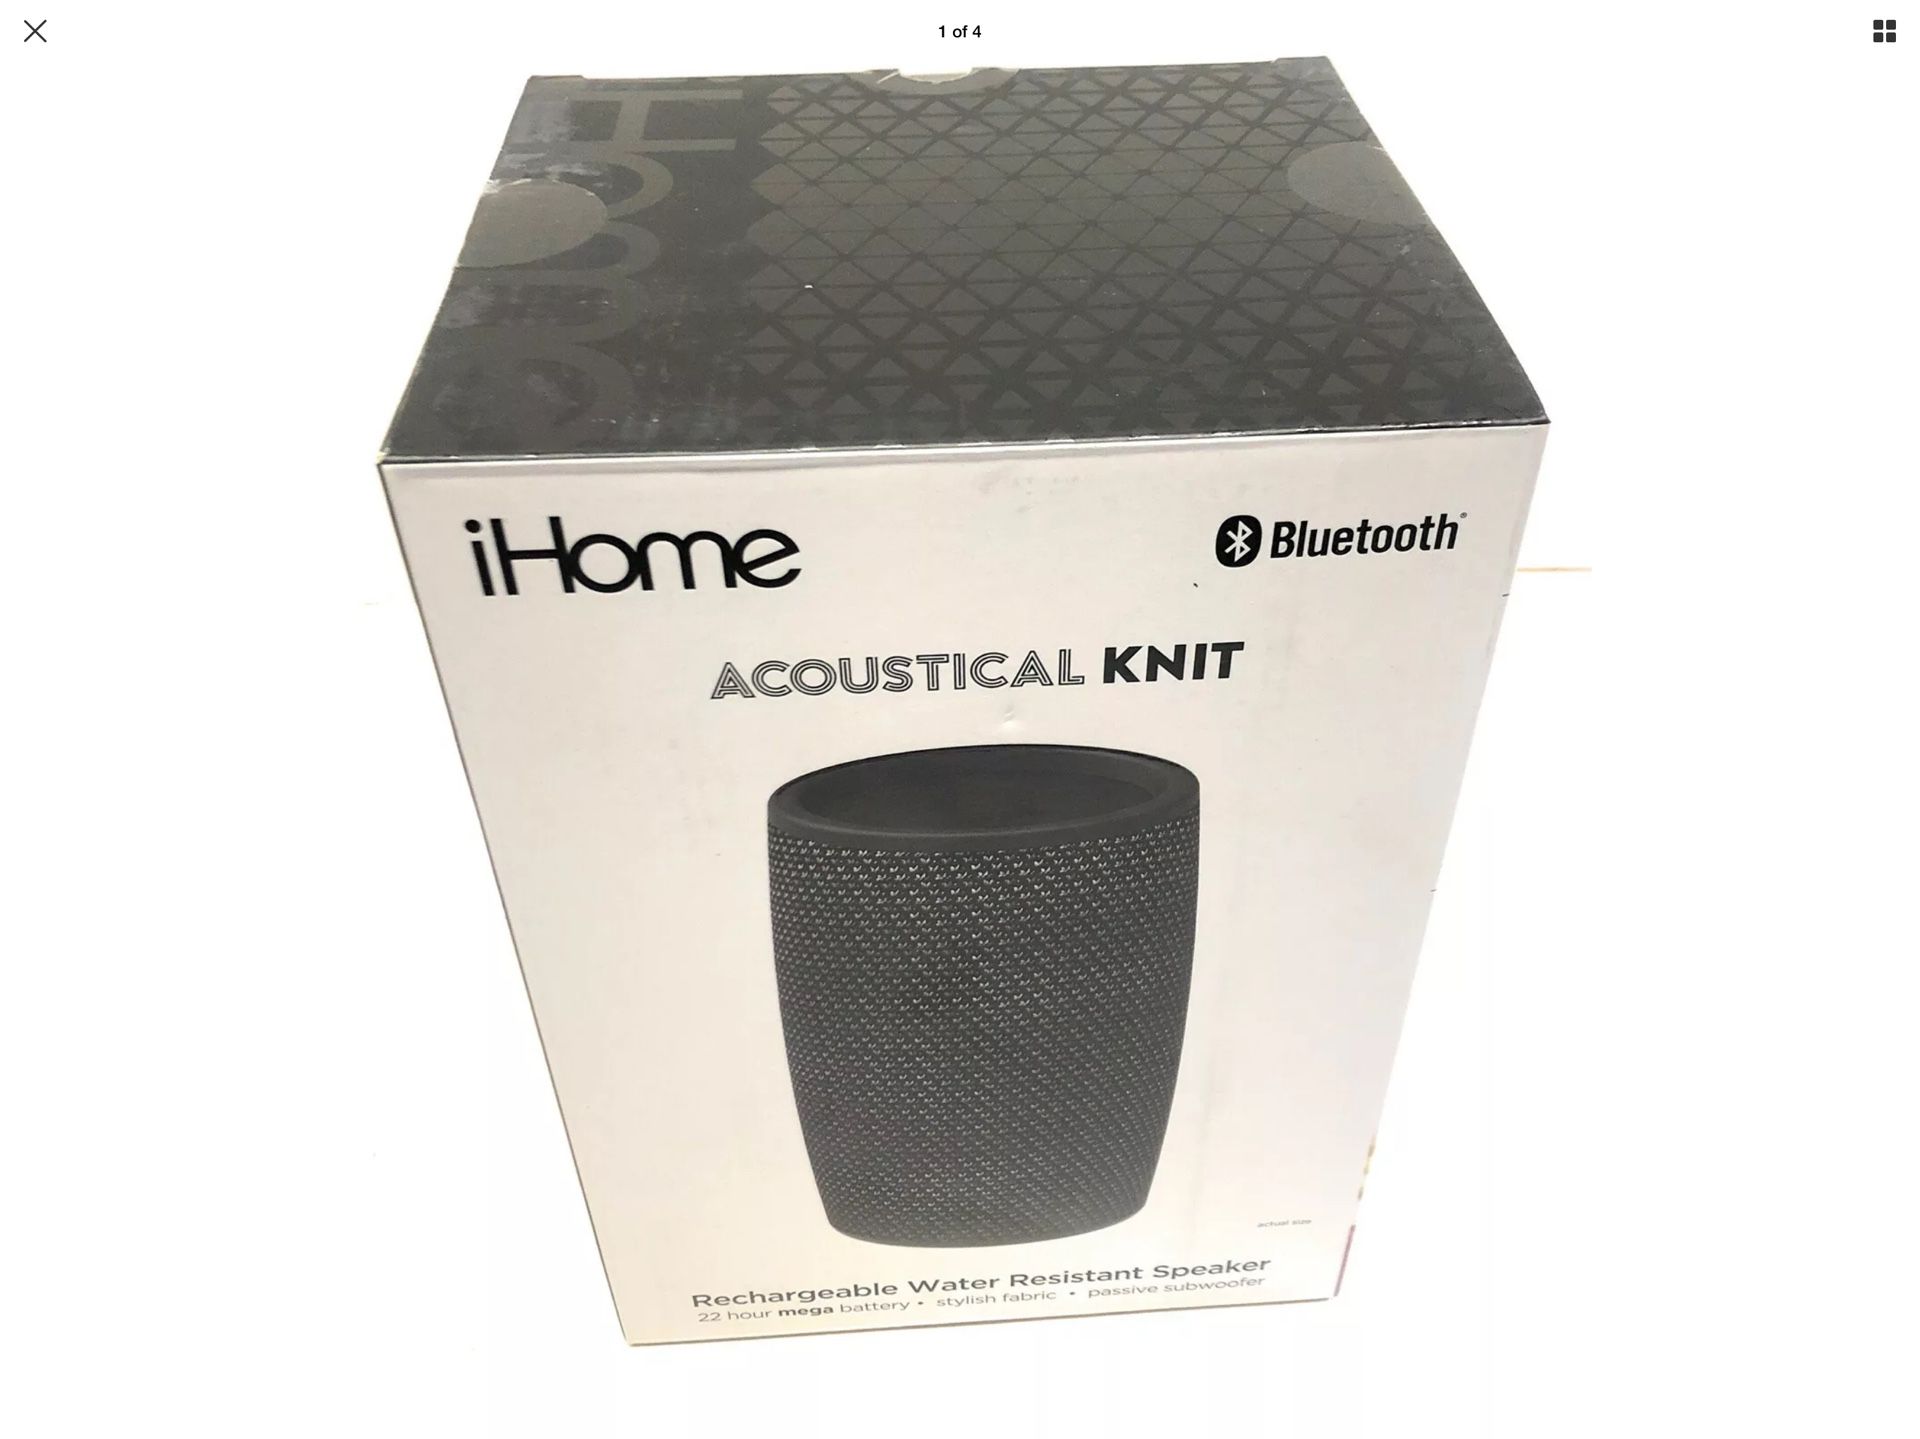 iHome Acoustical Knit Bluetooth Rechargeable Water Resistant Speaker